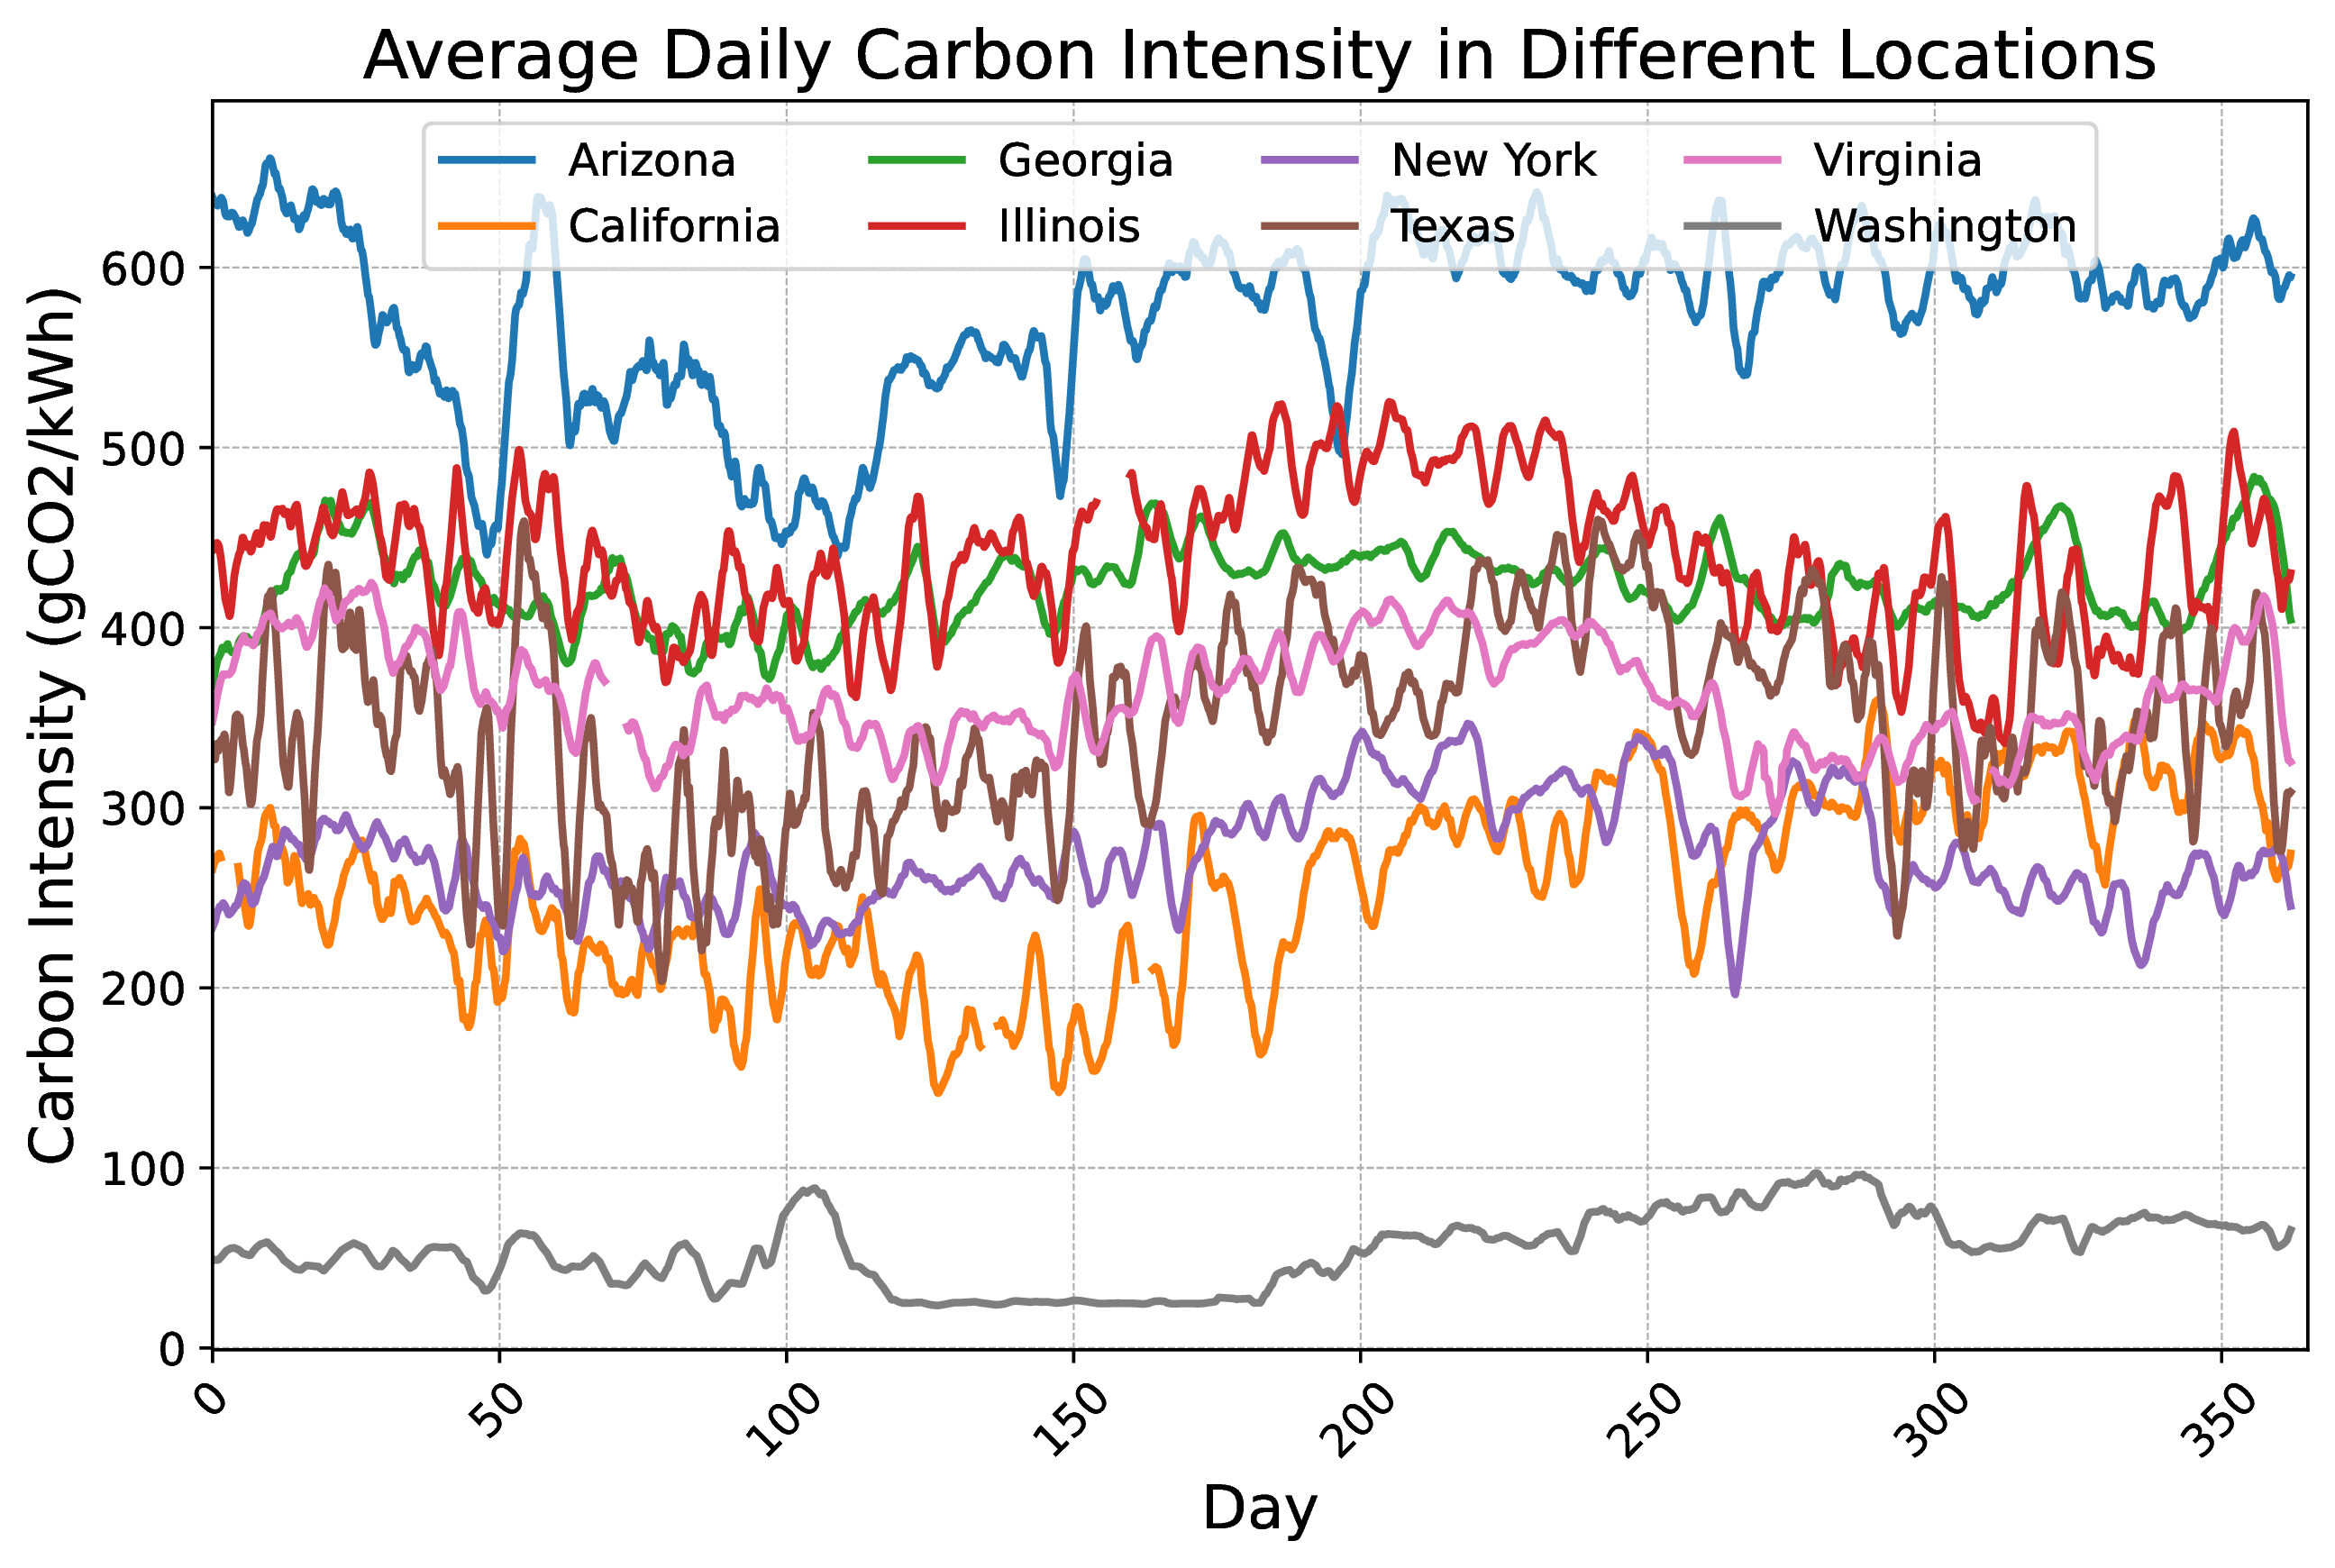 Comparison of carbon intensity across the different selected locations.